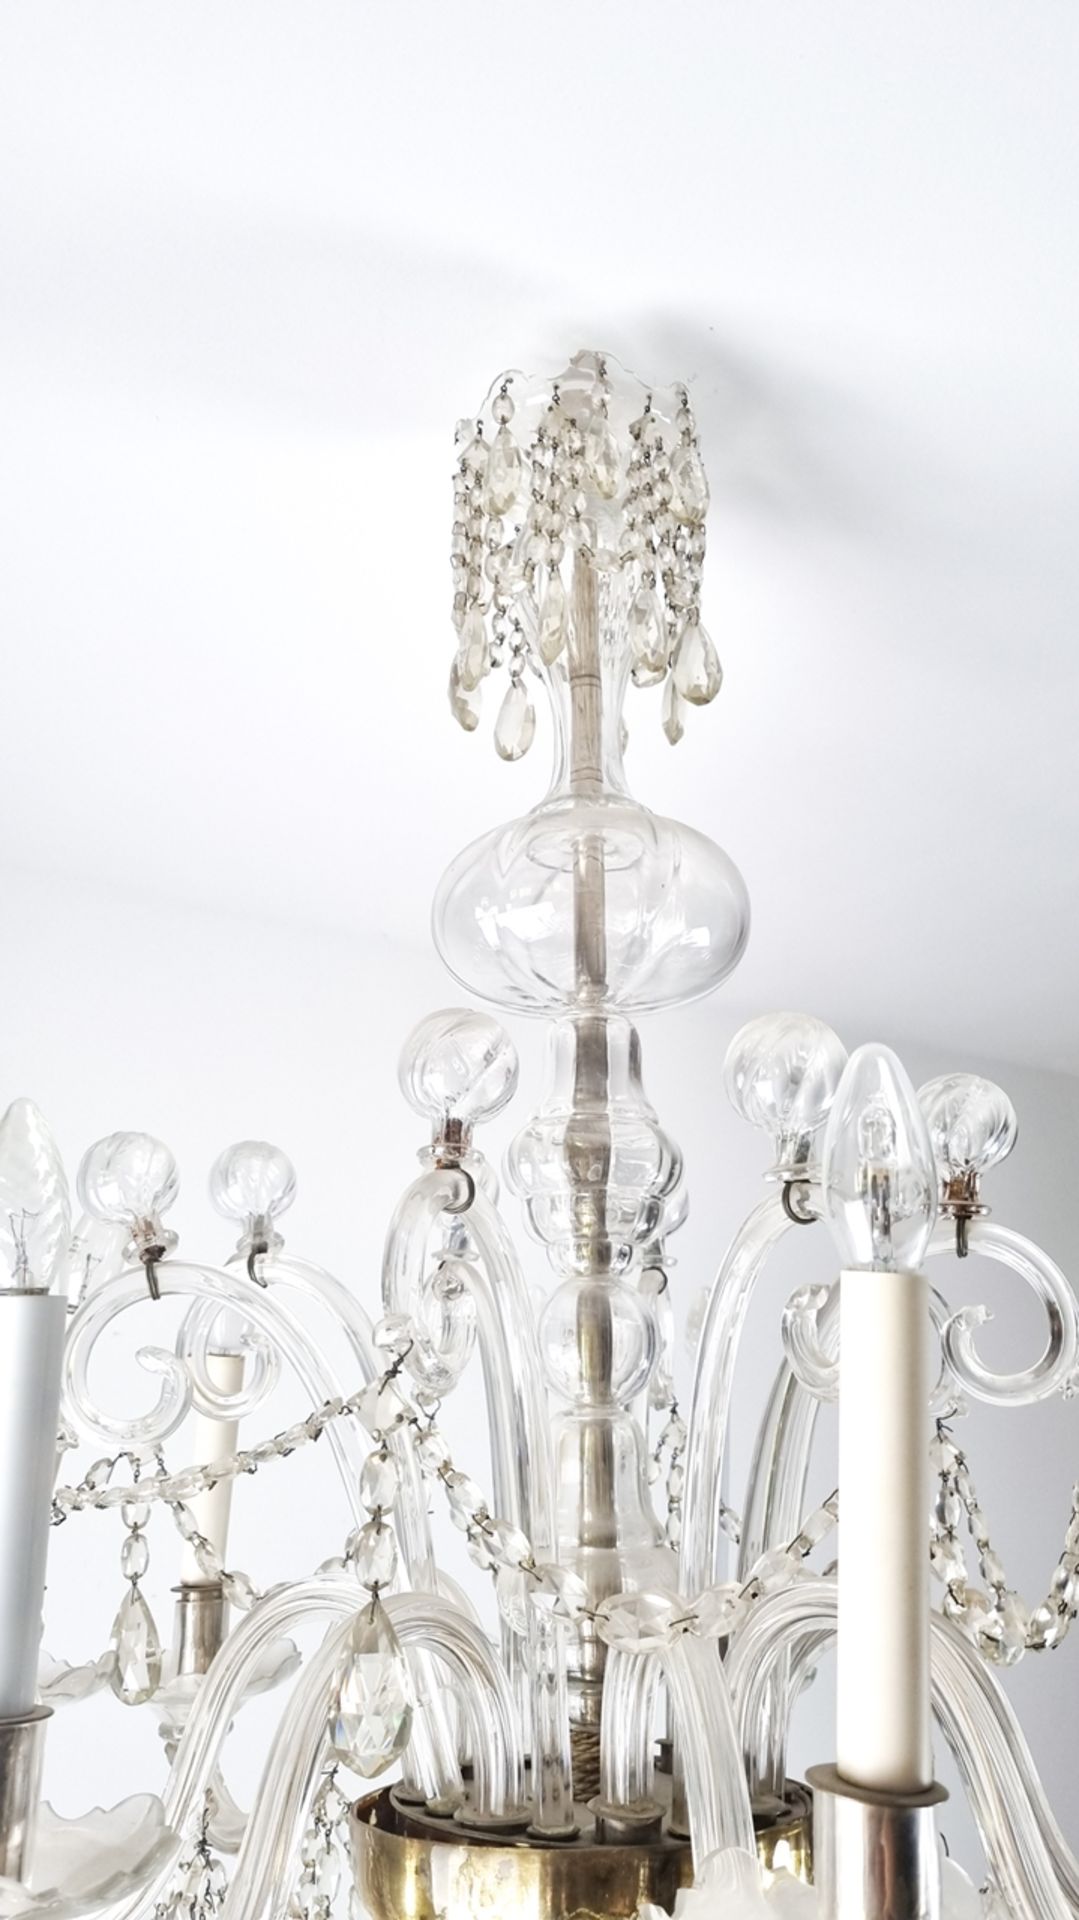 Ornate glass chandelier from vienna - Image 3 of 4